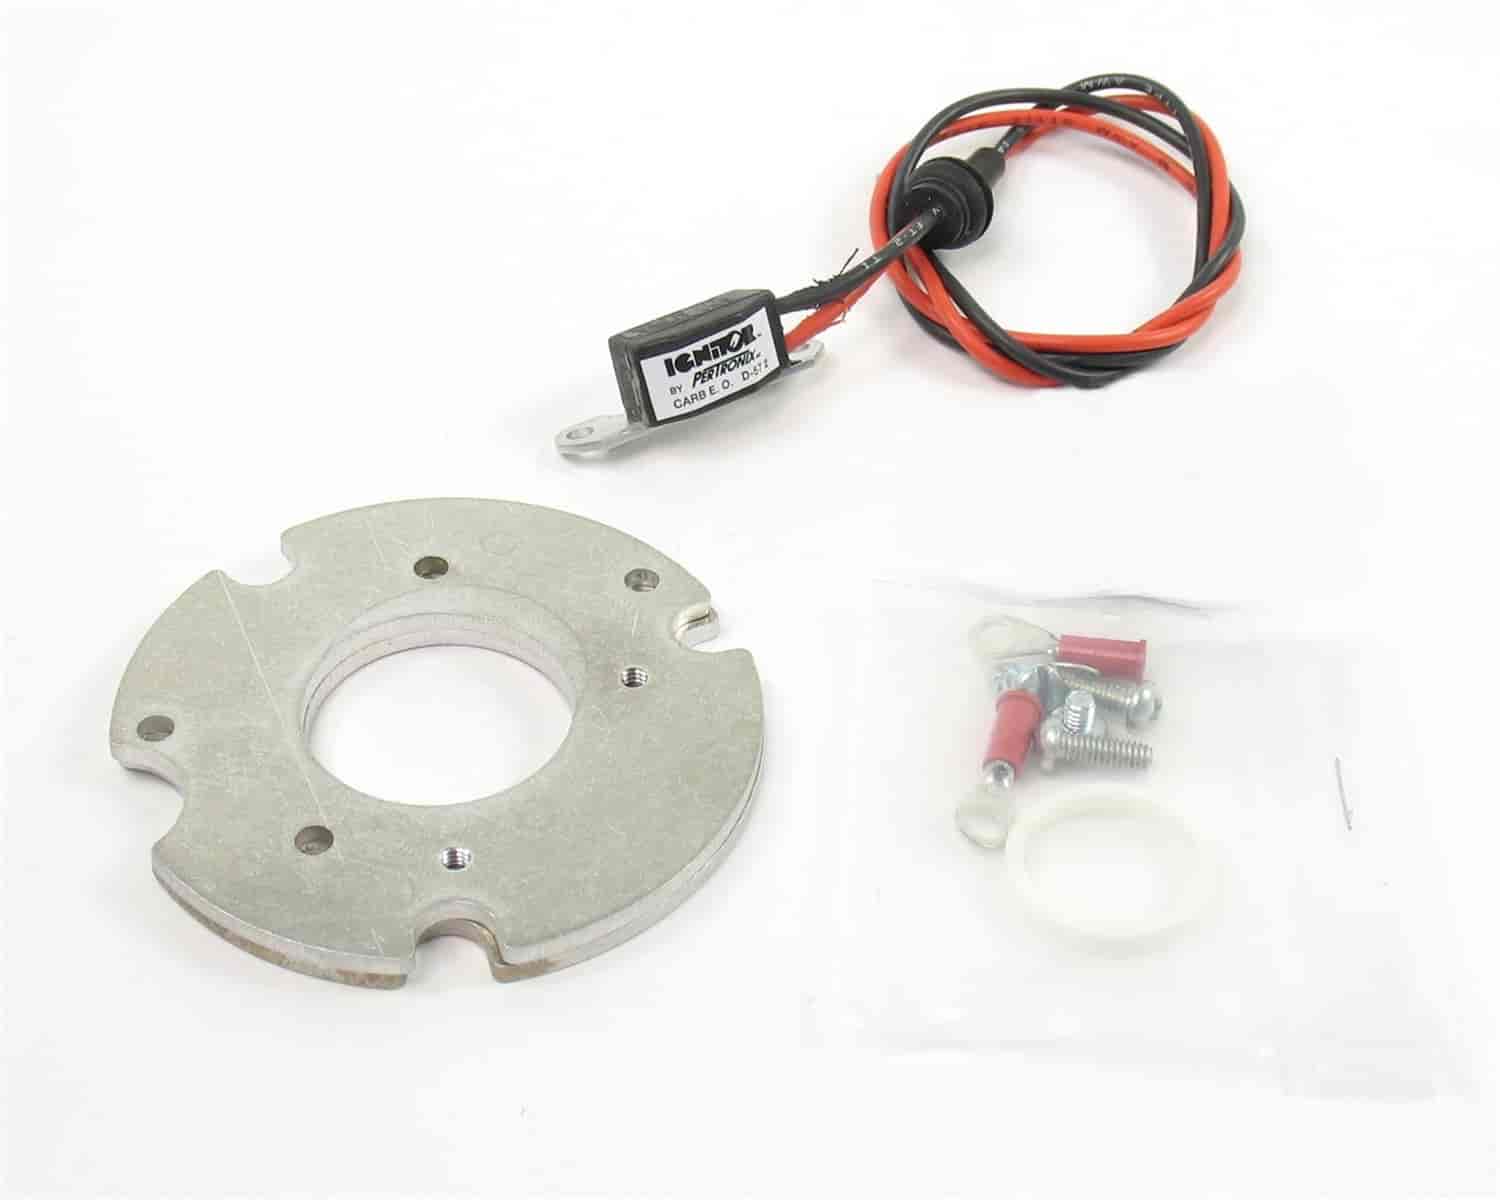 Ignition MODULE ACCEL 37000 SERIES Carb Approved D-57-22